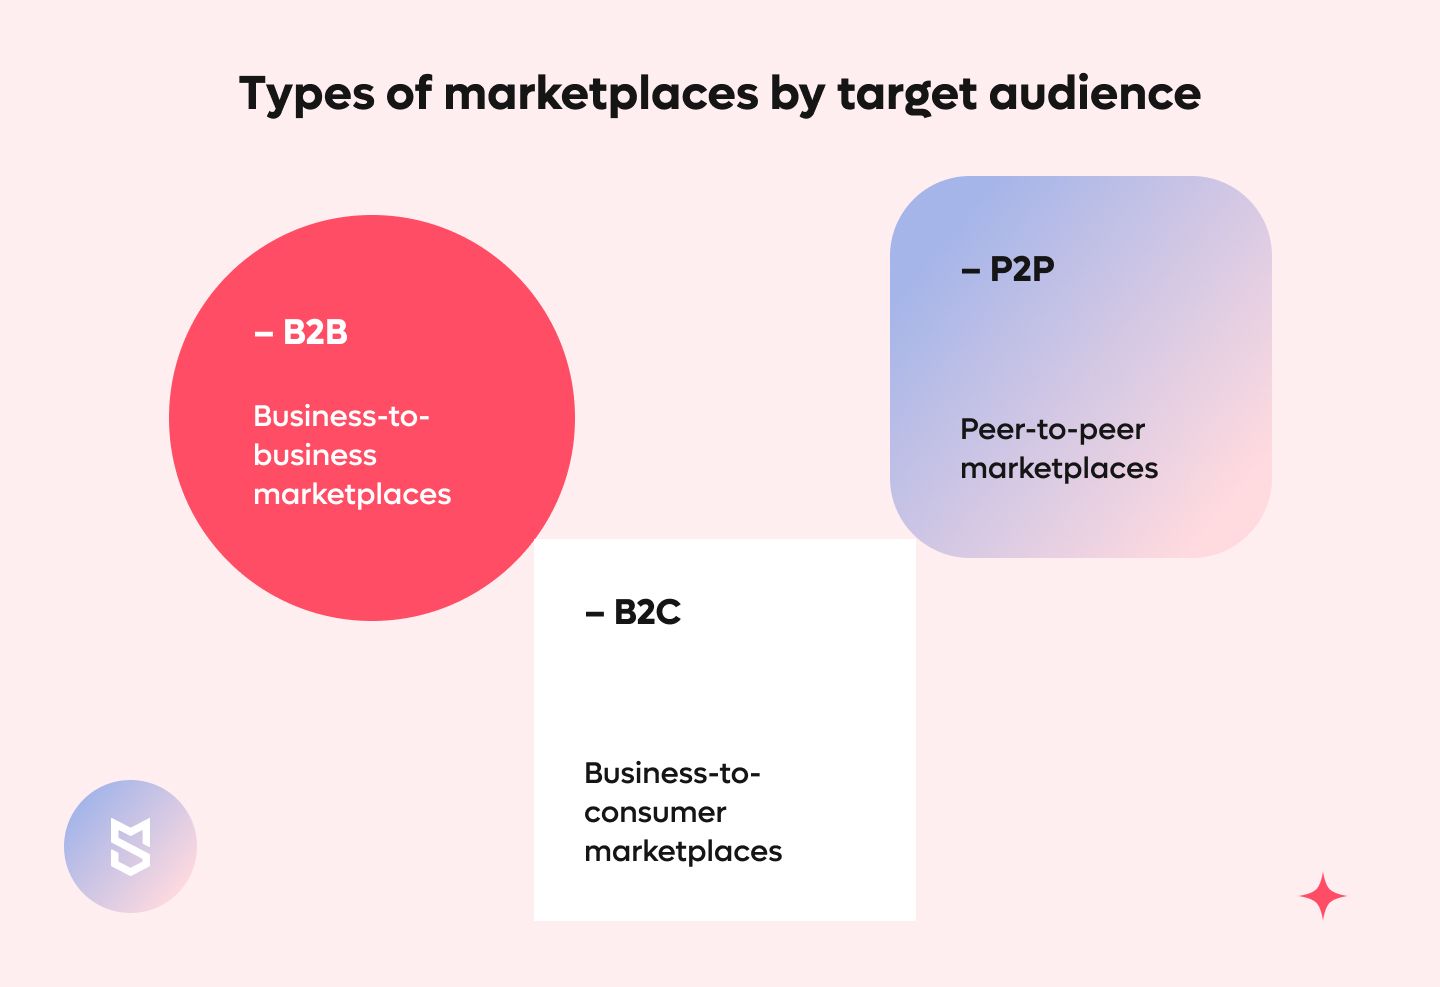 Types of marketplaces by target audience